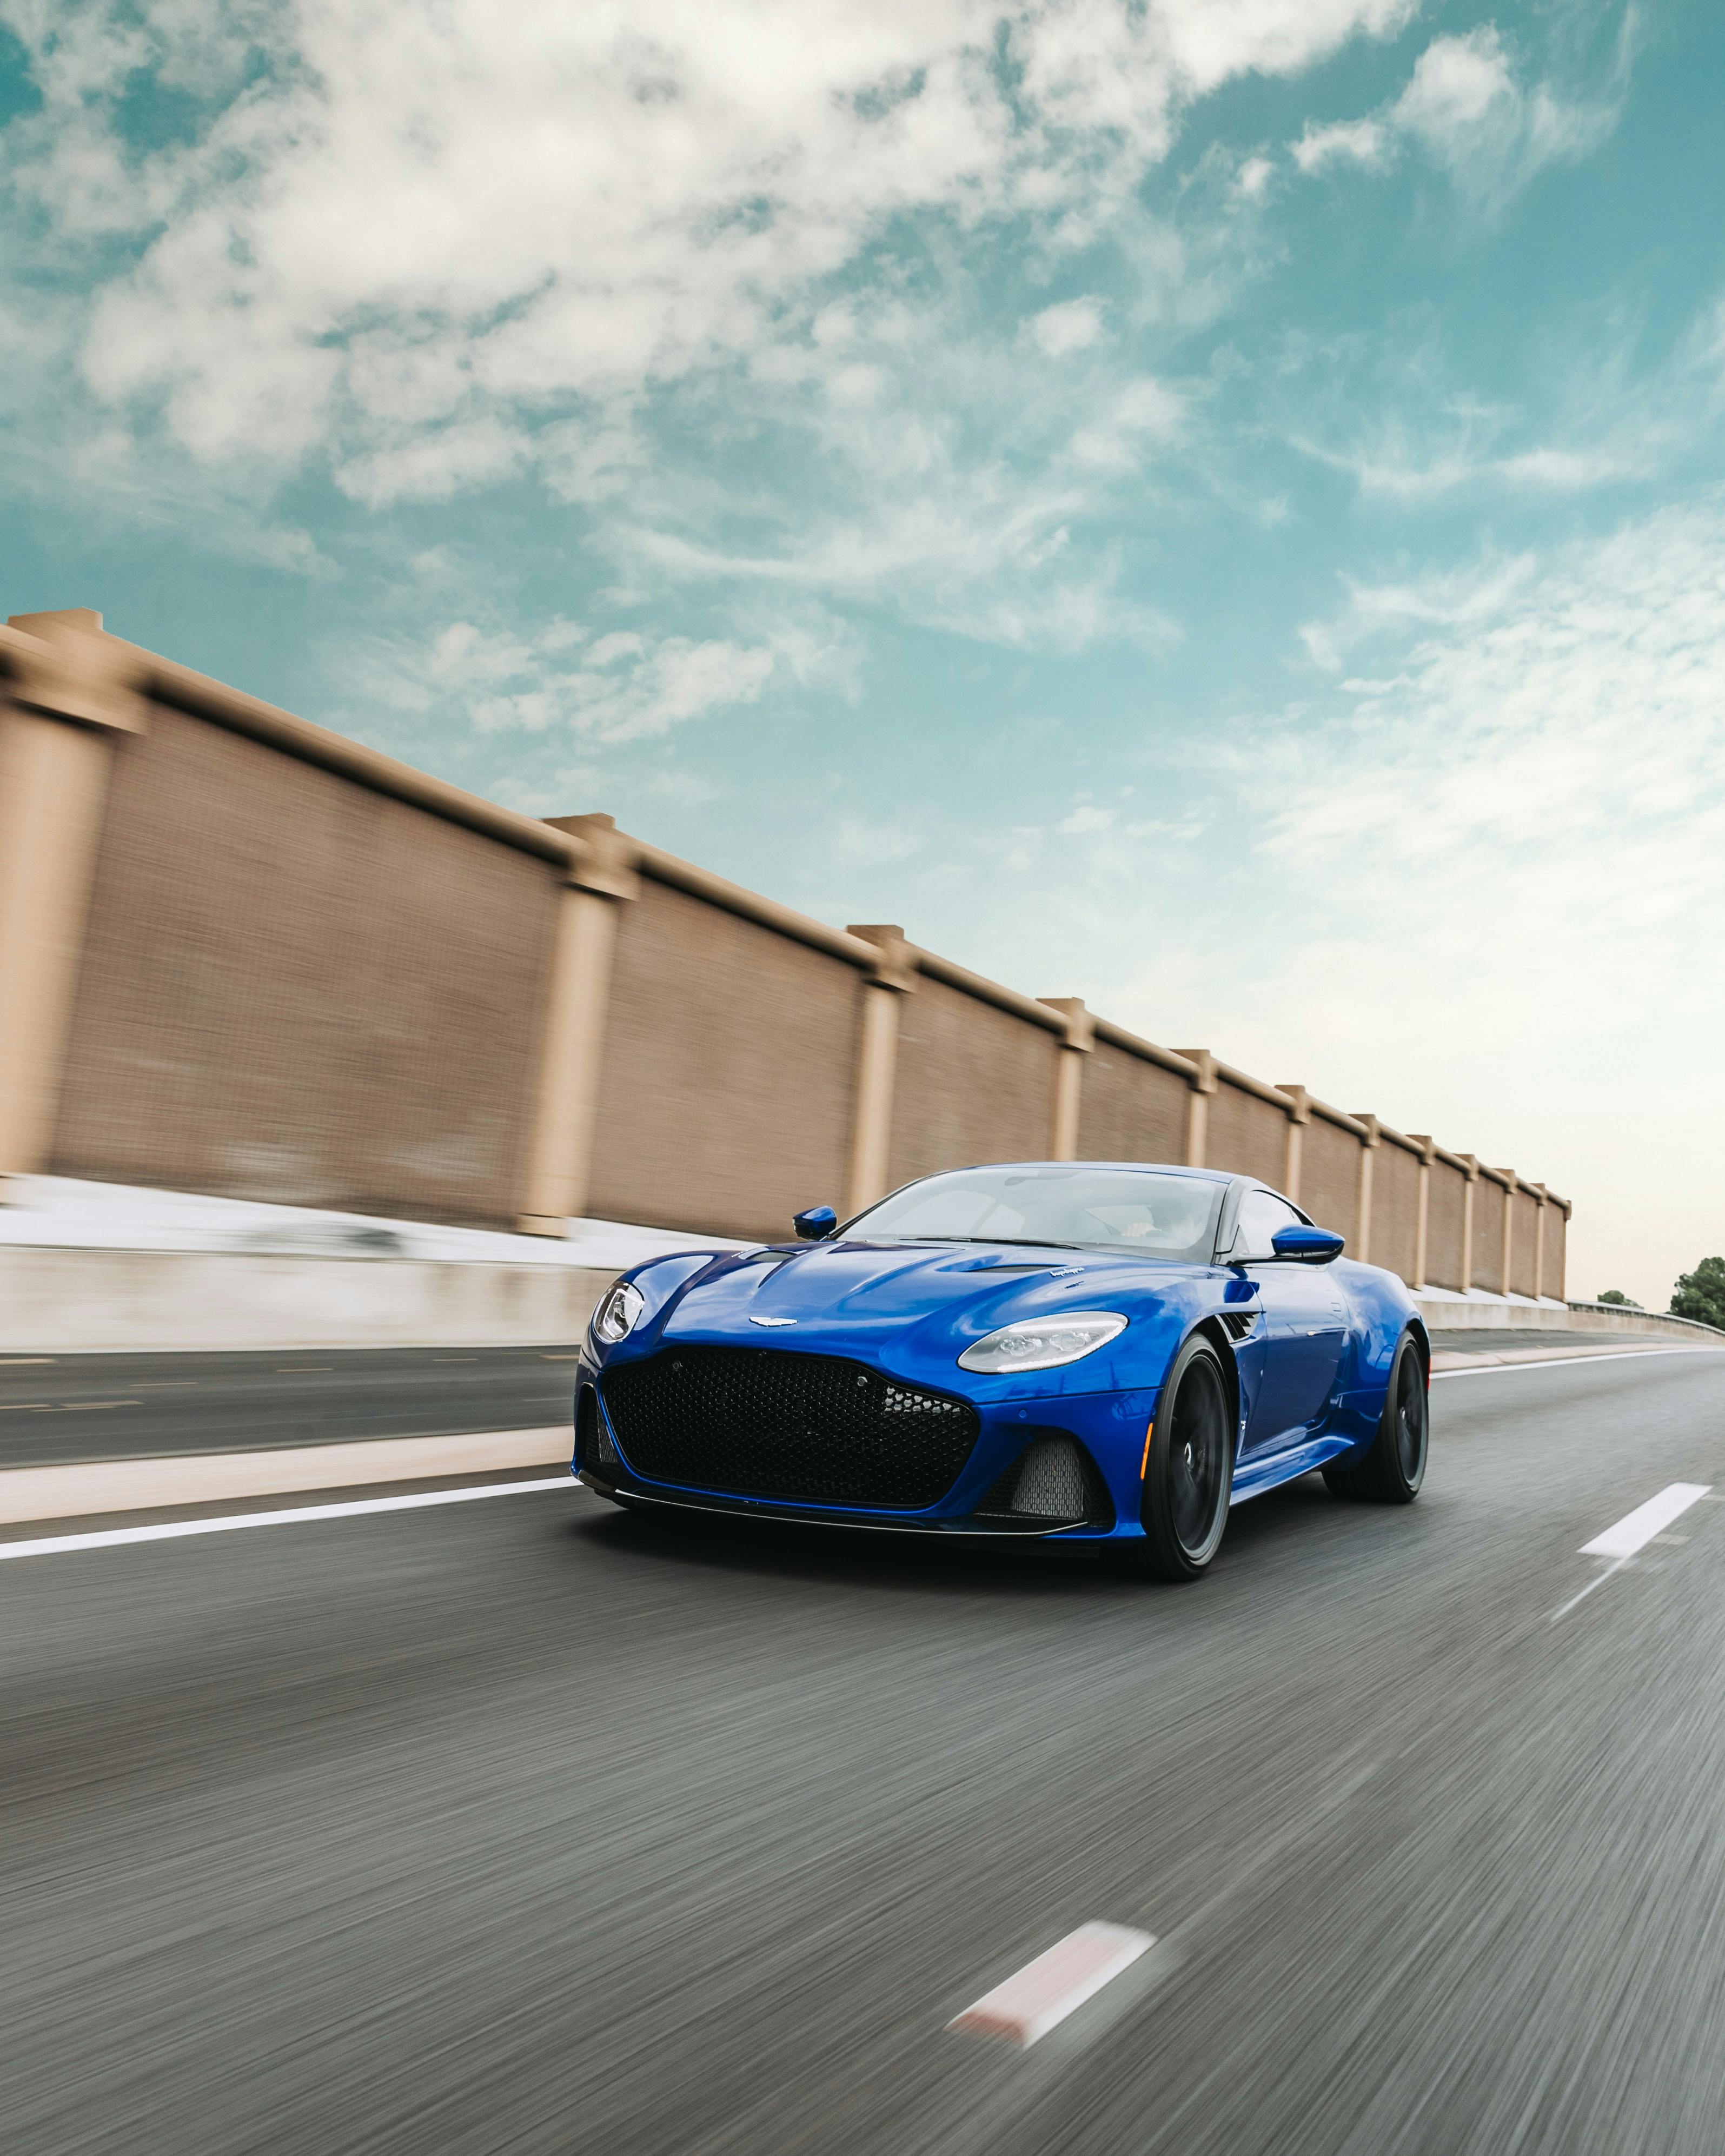 Blue sports car driving quickly on two-lane road